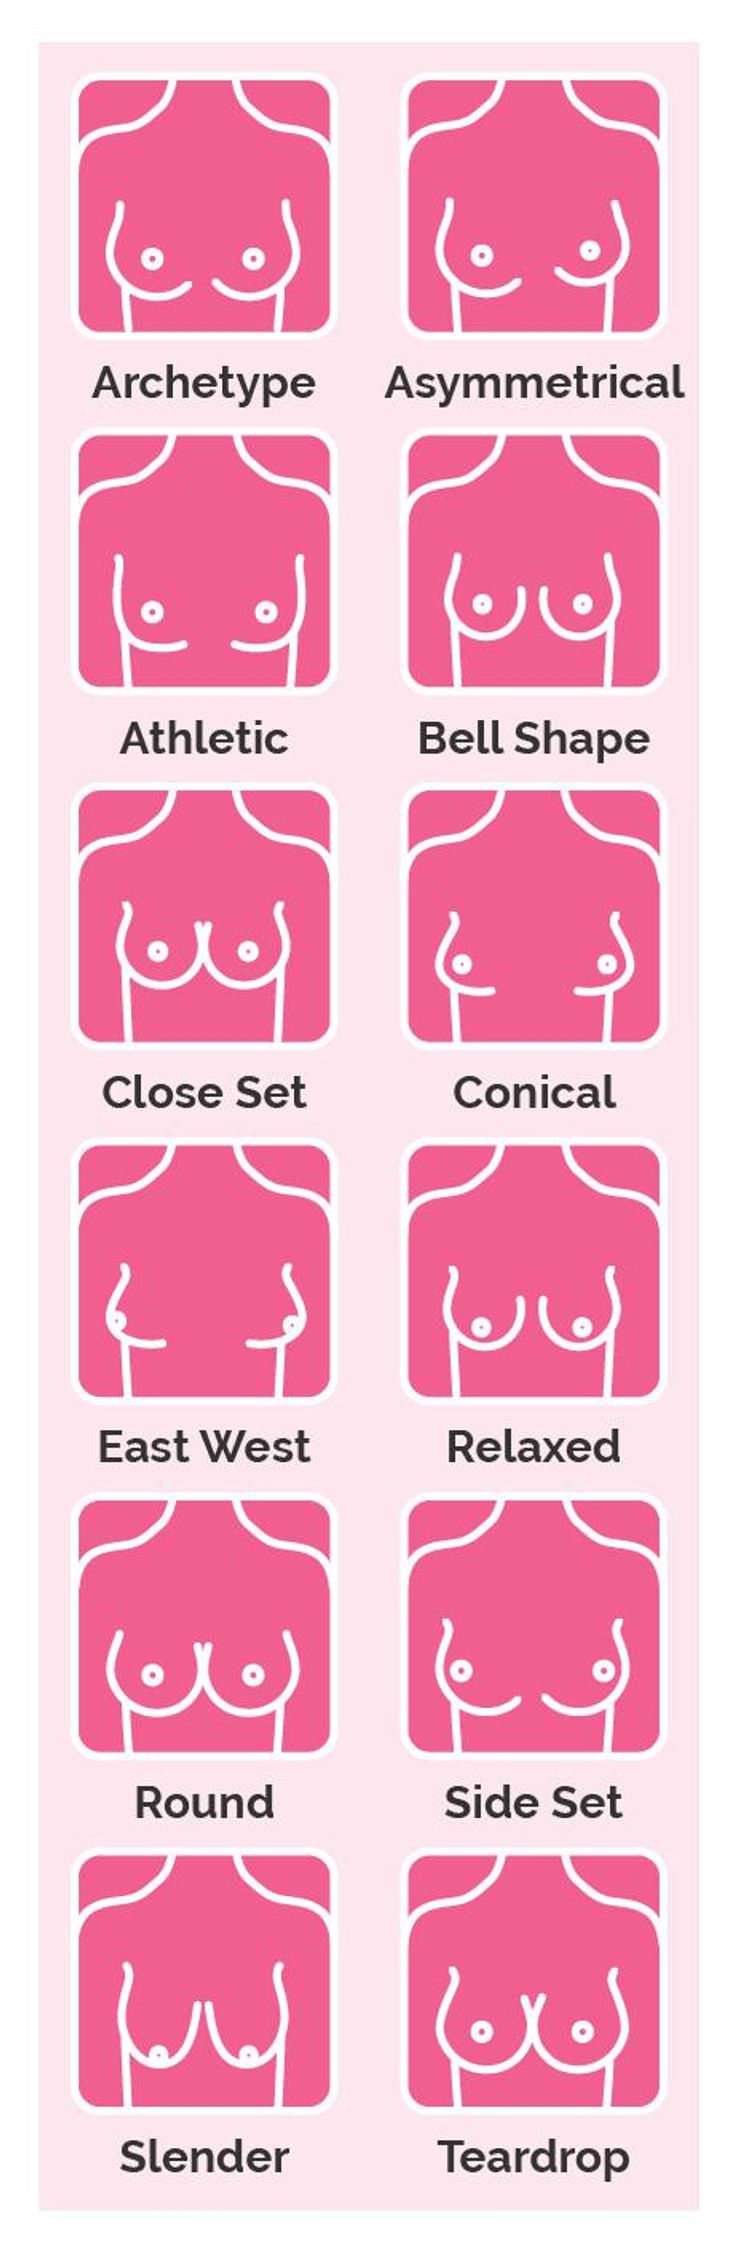 Classification for Breast Shape